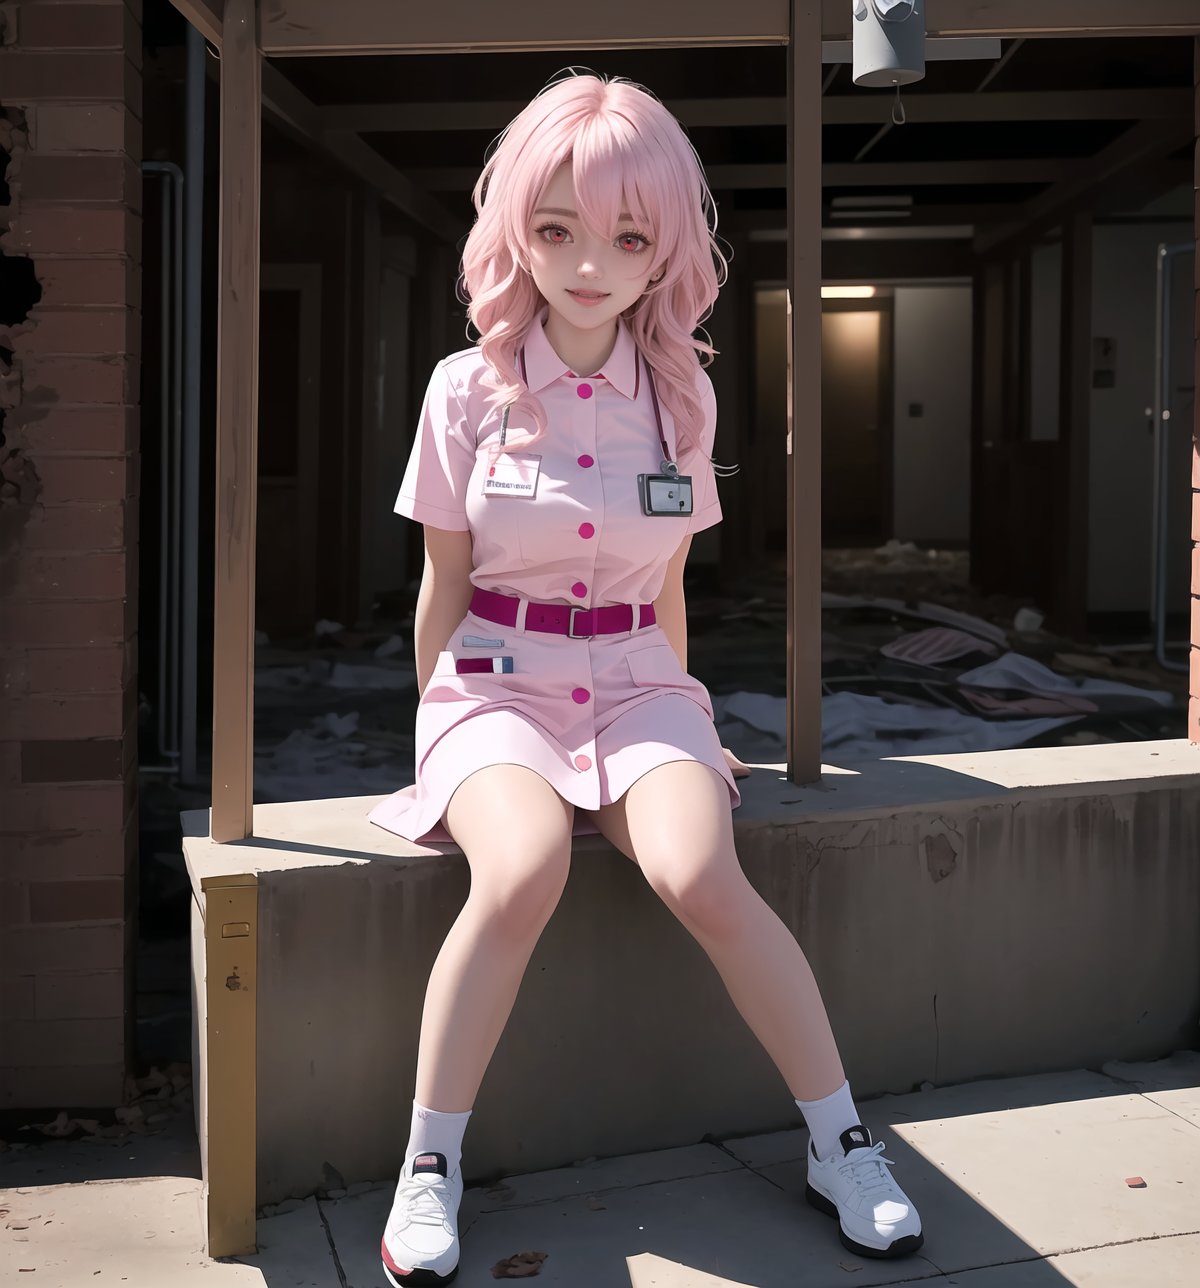 An ultra-detailed 4K masterpiece featuring horror and fantasy styles, rendered in ultra-high resolution with stunning graphical detail. | Maiya, a 23-year-old female nurse, dressed in a white nurse's uniform consisting of a white button-down blouse, white skirt and white shoes. Her long, wavy ((pink hair)) falls over her shoulders, giving her an innocent and vulnerable look. ((Its red eyes are fixed on the viewer, smiling and showing its white teeth)). | The image highlights Maiya's imposing figure and the architectural elements of the macabre, destroyed and filthy hospital in which she finds herself. The destroyed hospital structures and broken hospital machines scattered across the floor create a frightening and oppressive environment. Blinking bulbs create dramatic shadows and highlight details in the scene. In the background, a demon in the shadows looks at Maiya, adding an extra layer of tension and fear. | Soft, shadowy lighting effects create a tense, fear-filled atmosphere, while rough, detailed textures on structures and uniforms add realism to the image. | A haunting and suspenseful scene of a woman nurse in a macabre hospital, exploring themes of horror, fear and survival. | (((The image reveals a full-body shot as Maiya assumes a sensual pose, engagingly leaning against a structure within the scene in an exciting manner. She takes on a sensual pose as she interacts, boldly leaning on a structure, leaning back and boldly throwing herself onto the structure, reclining back in an exhilarating way.))). | ((((full-body shot)))), ((perfect pose)), ((perfect arms):1.2), ((perfect limbs, perfect fingers, better hands, perfect hands, hands)), ((perfect legs, perfect feet):1.2), ((perfect design)), ((perfect composition)), ((very detailed scene, very detailed background, perfect layout, correct imperfections)), Enhance, Ultra details, More Detail, ((poakl))